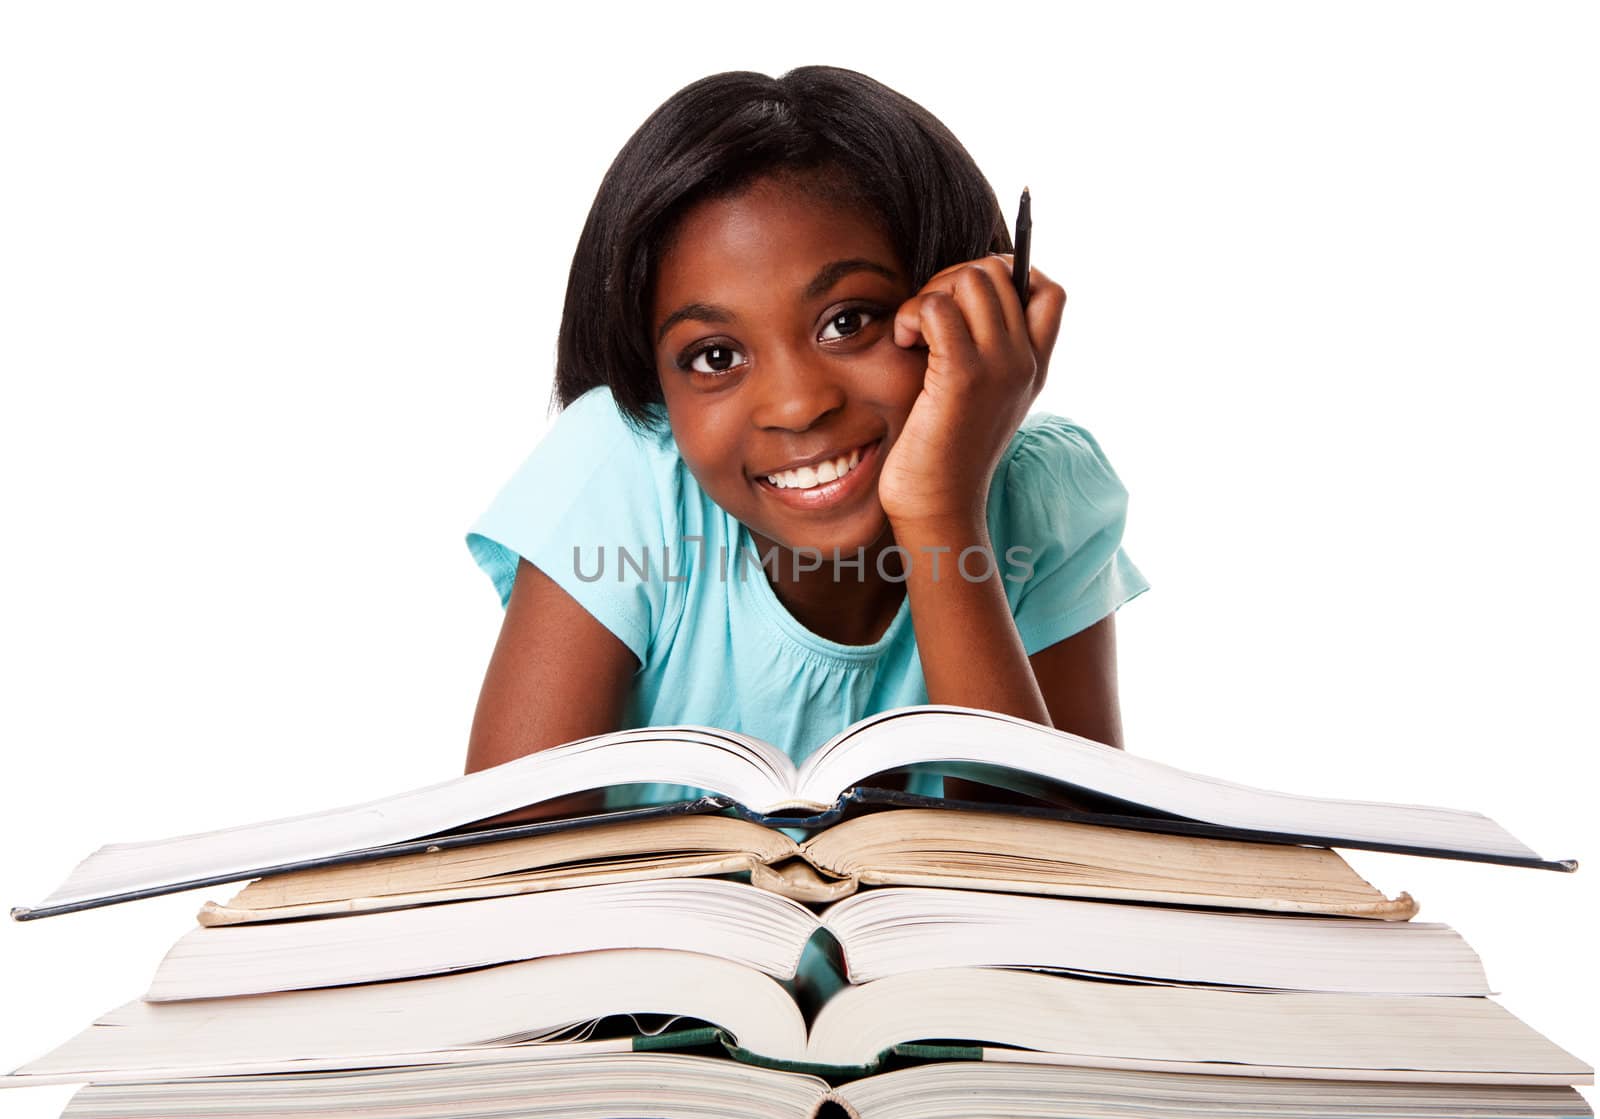 Beautiful happy smiling student with pen and a pile of open books doing homework, isolated.